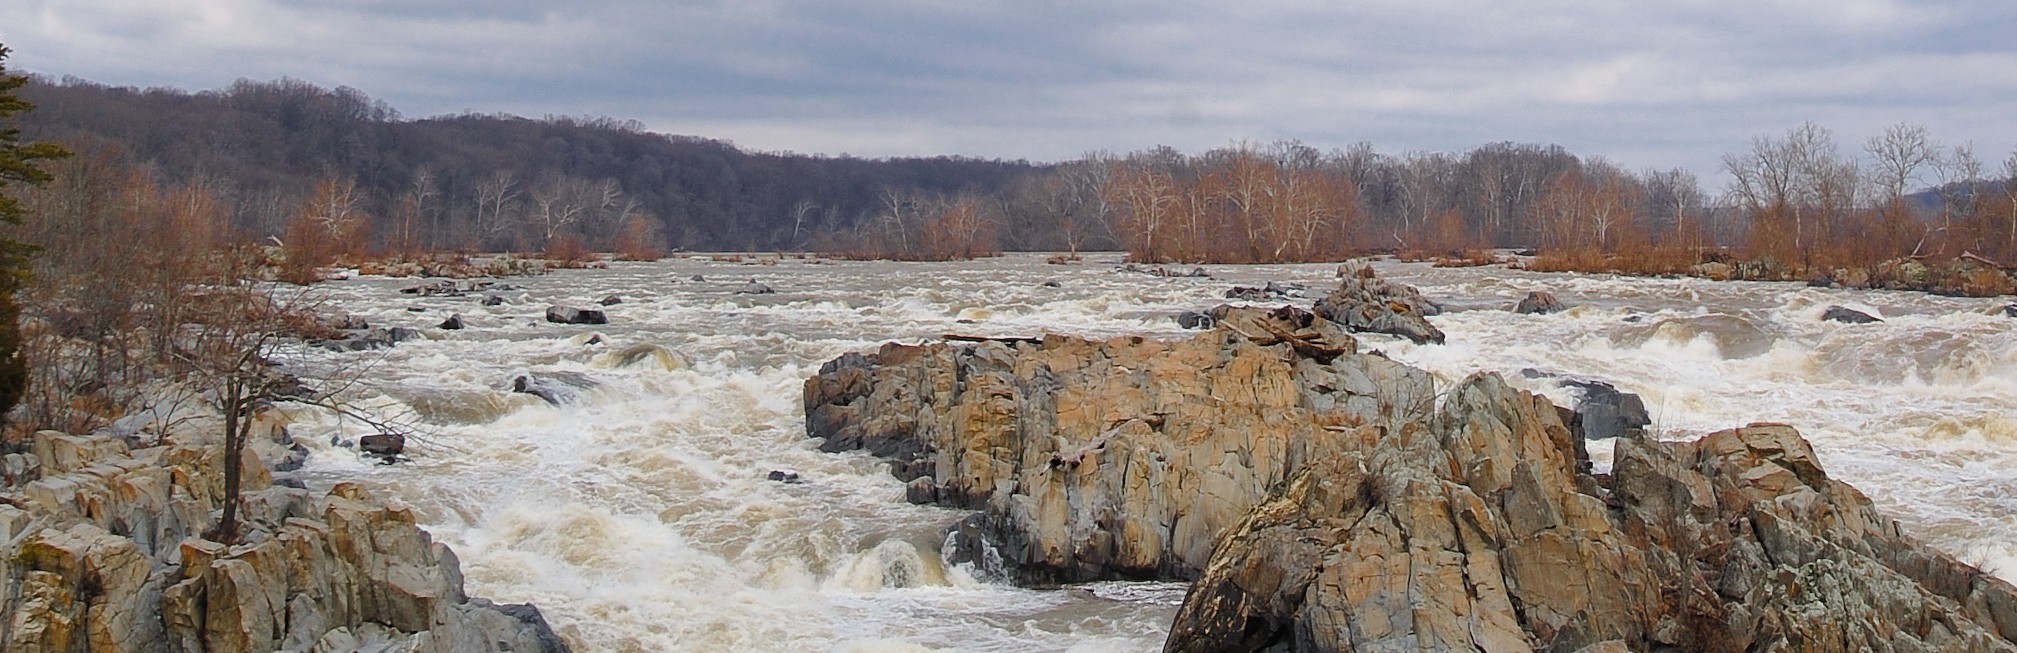 Wide=angle view of a very full Potomac river at Great Falls during winter. Bare trees are seen on both sides of the river.